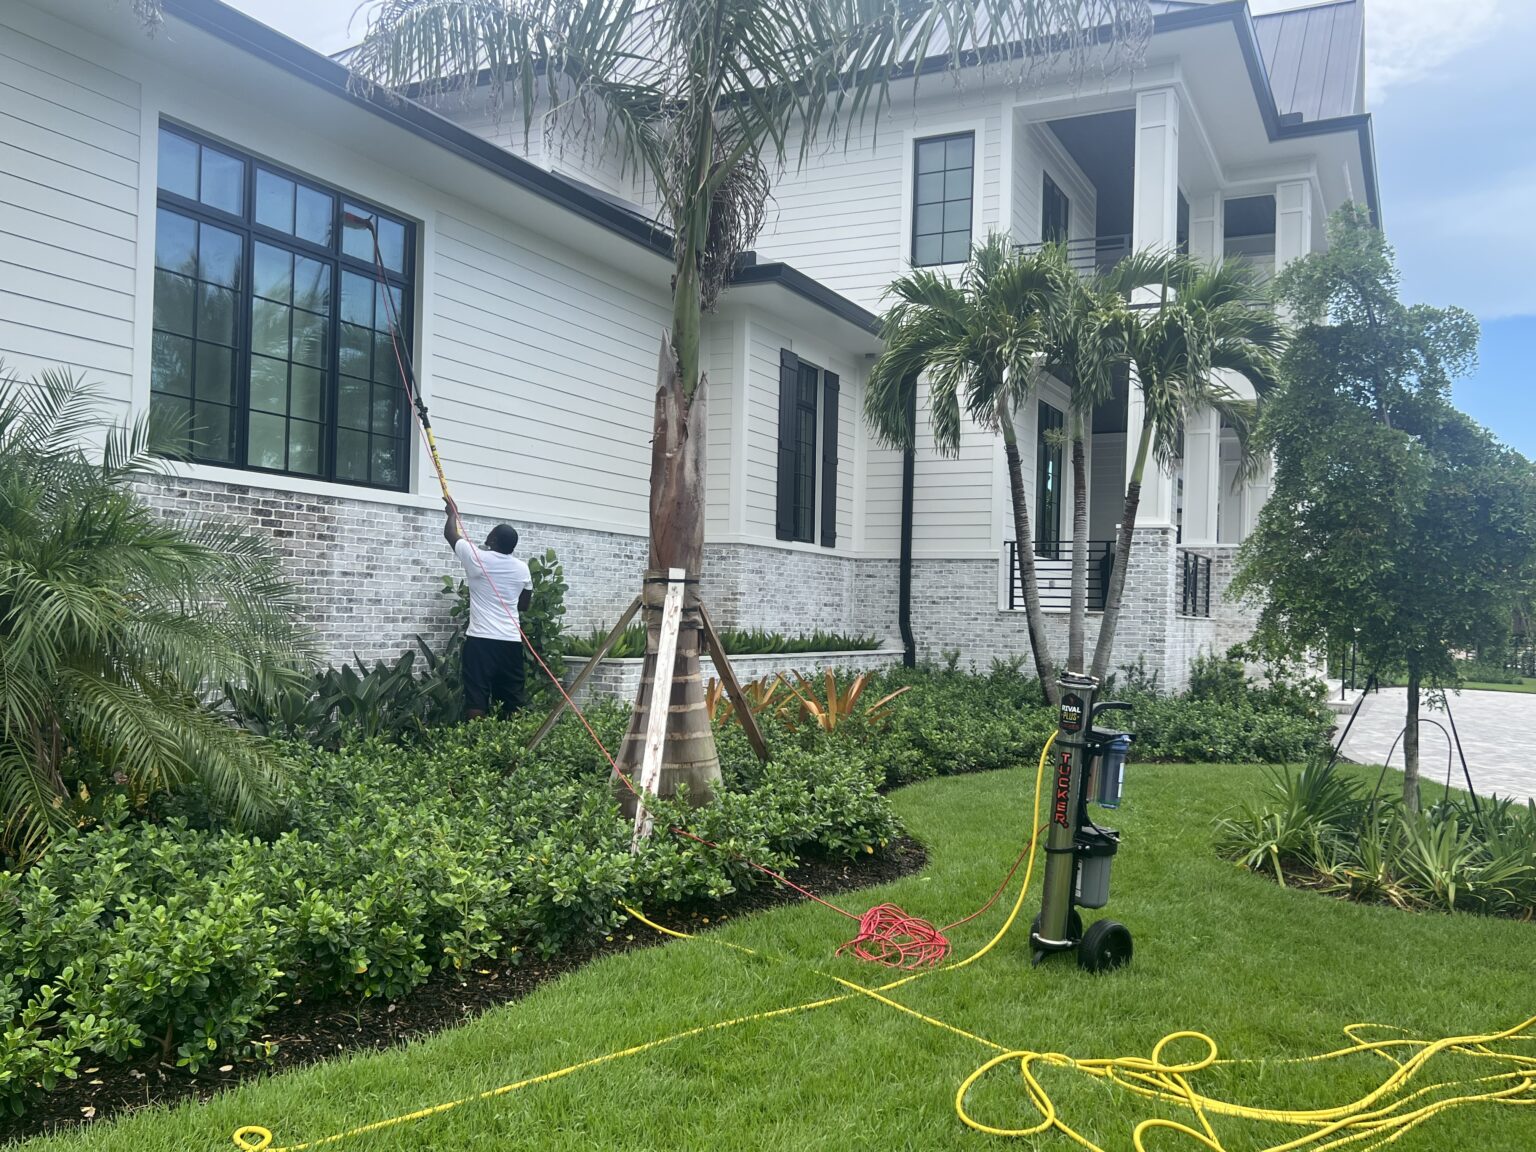 JR Pressure Wash Service: The Premier Window Cleaning Authority in St. Petersburg 1